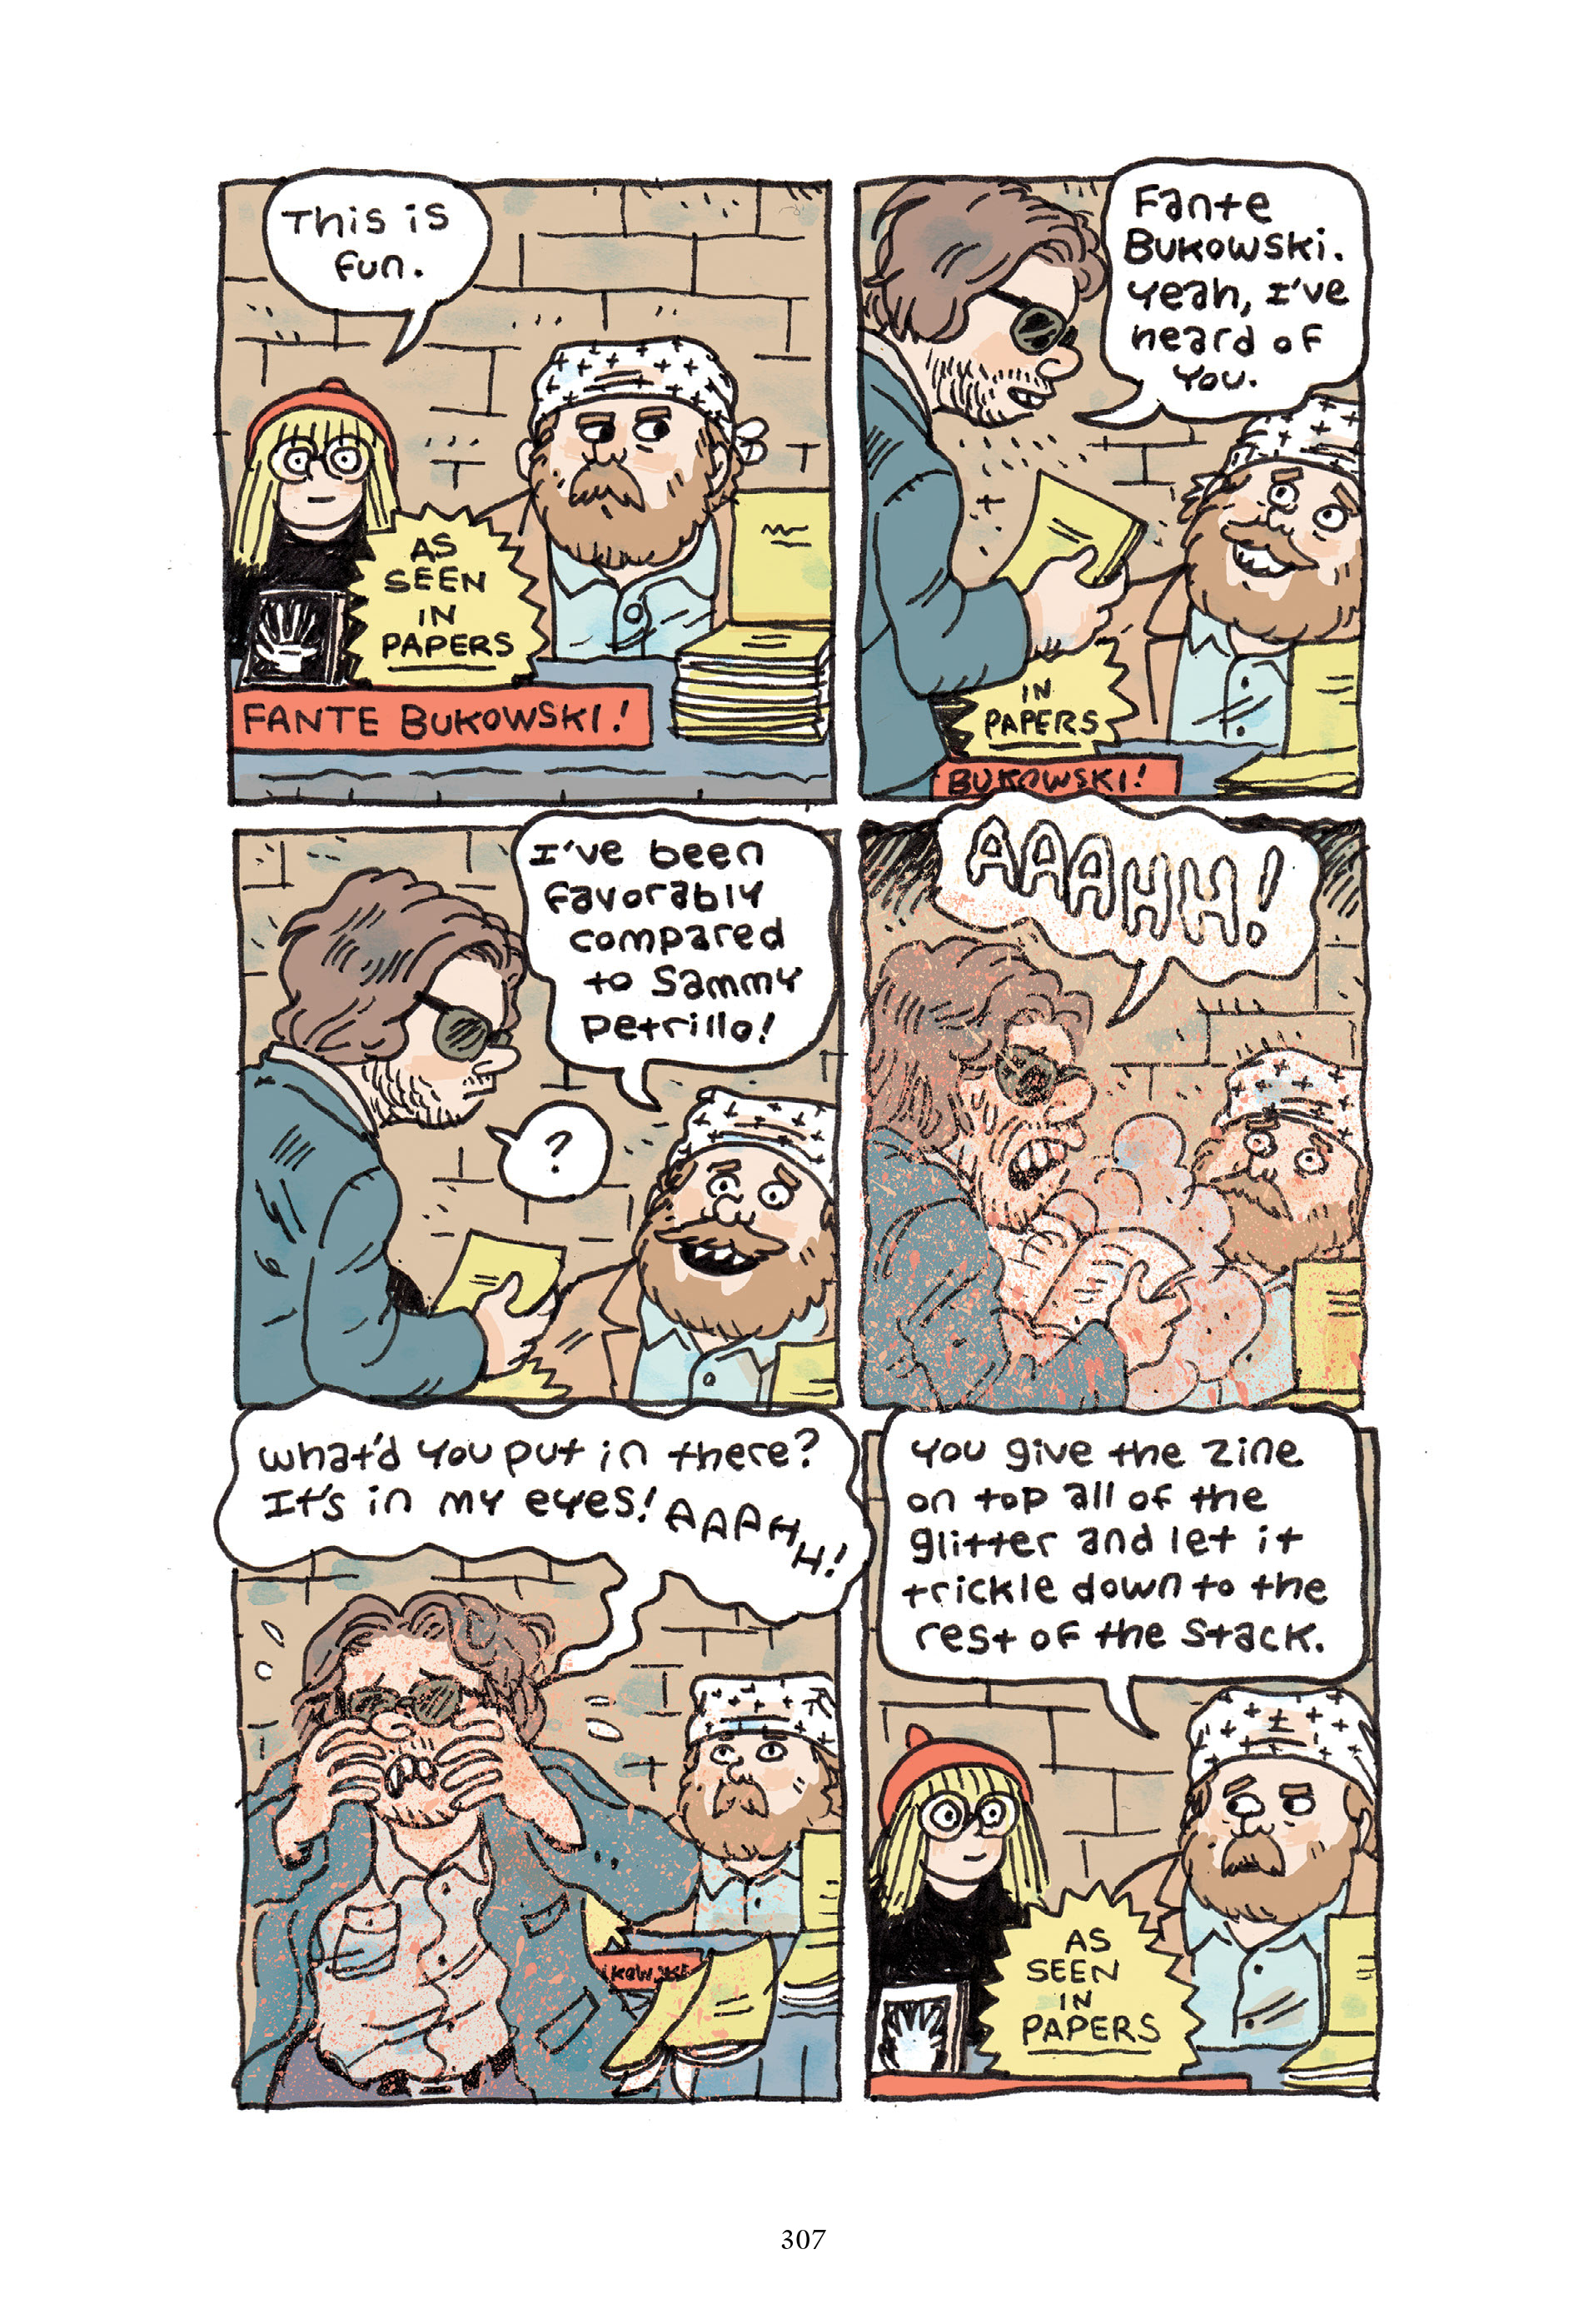 Read online The Complete Works of Fante Bukowski comic -  Issue # TPB (Part 4) - 5